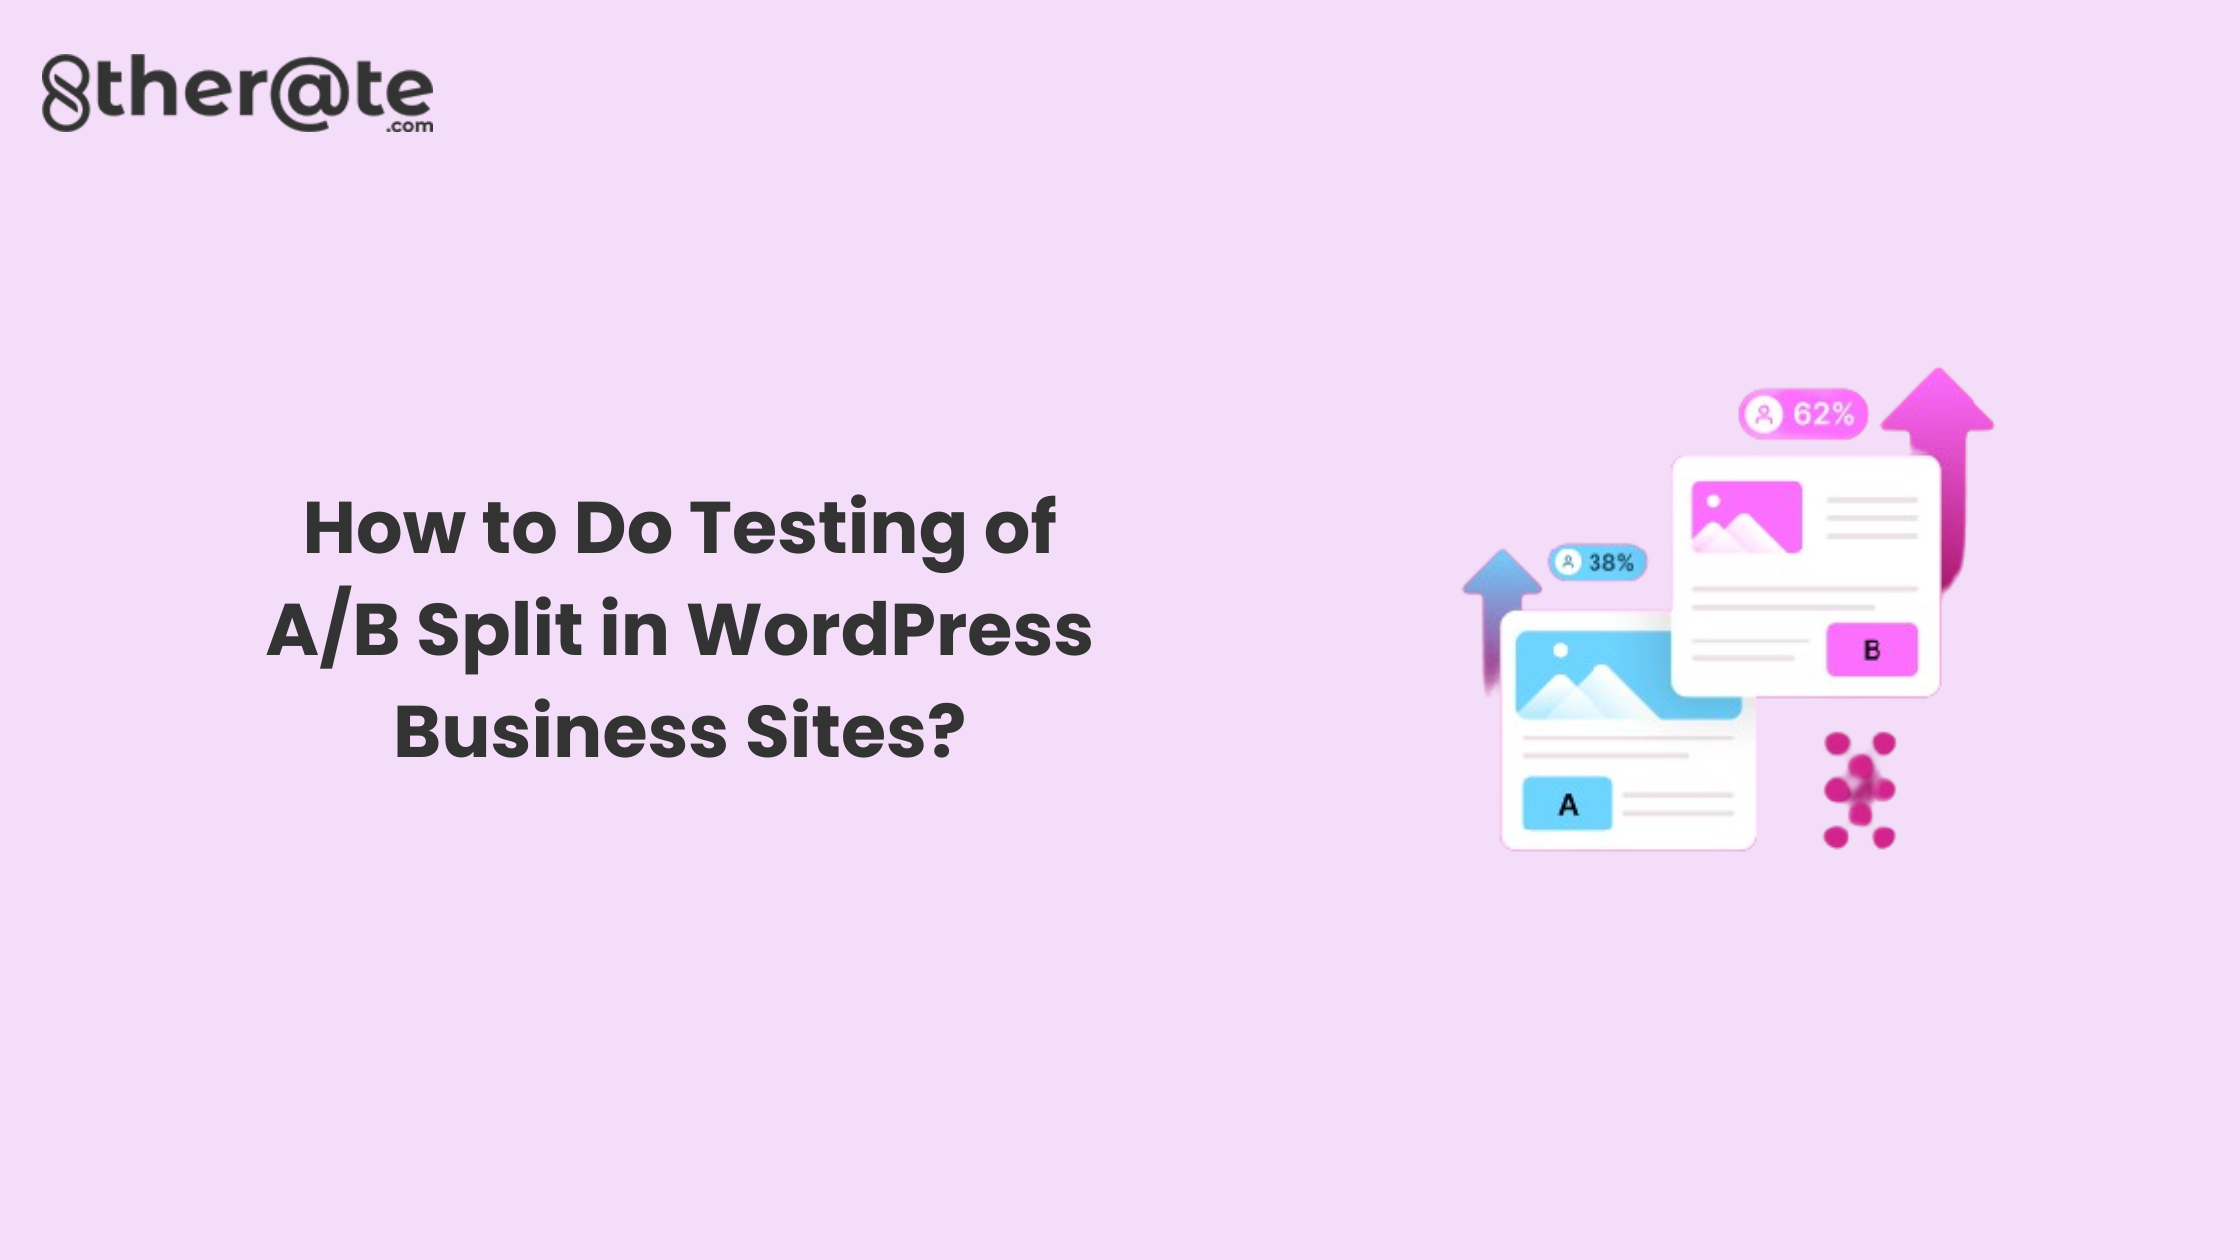 How to Do Testing of A/B Split in WordPress Business Sites?